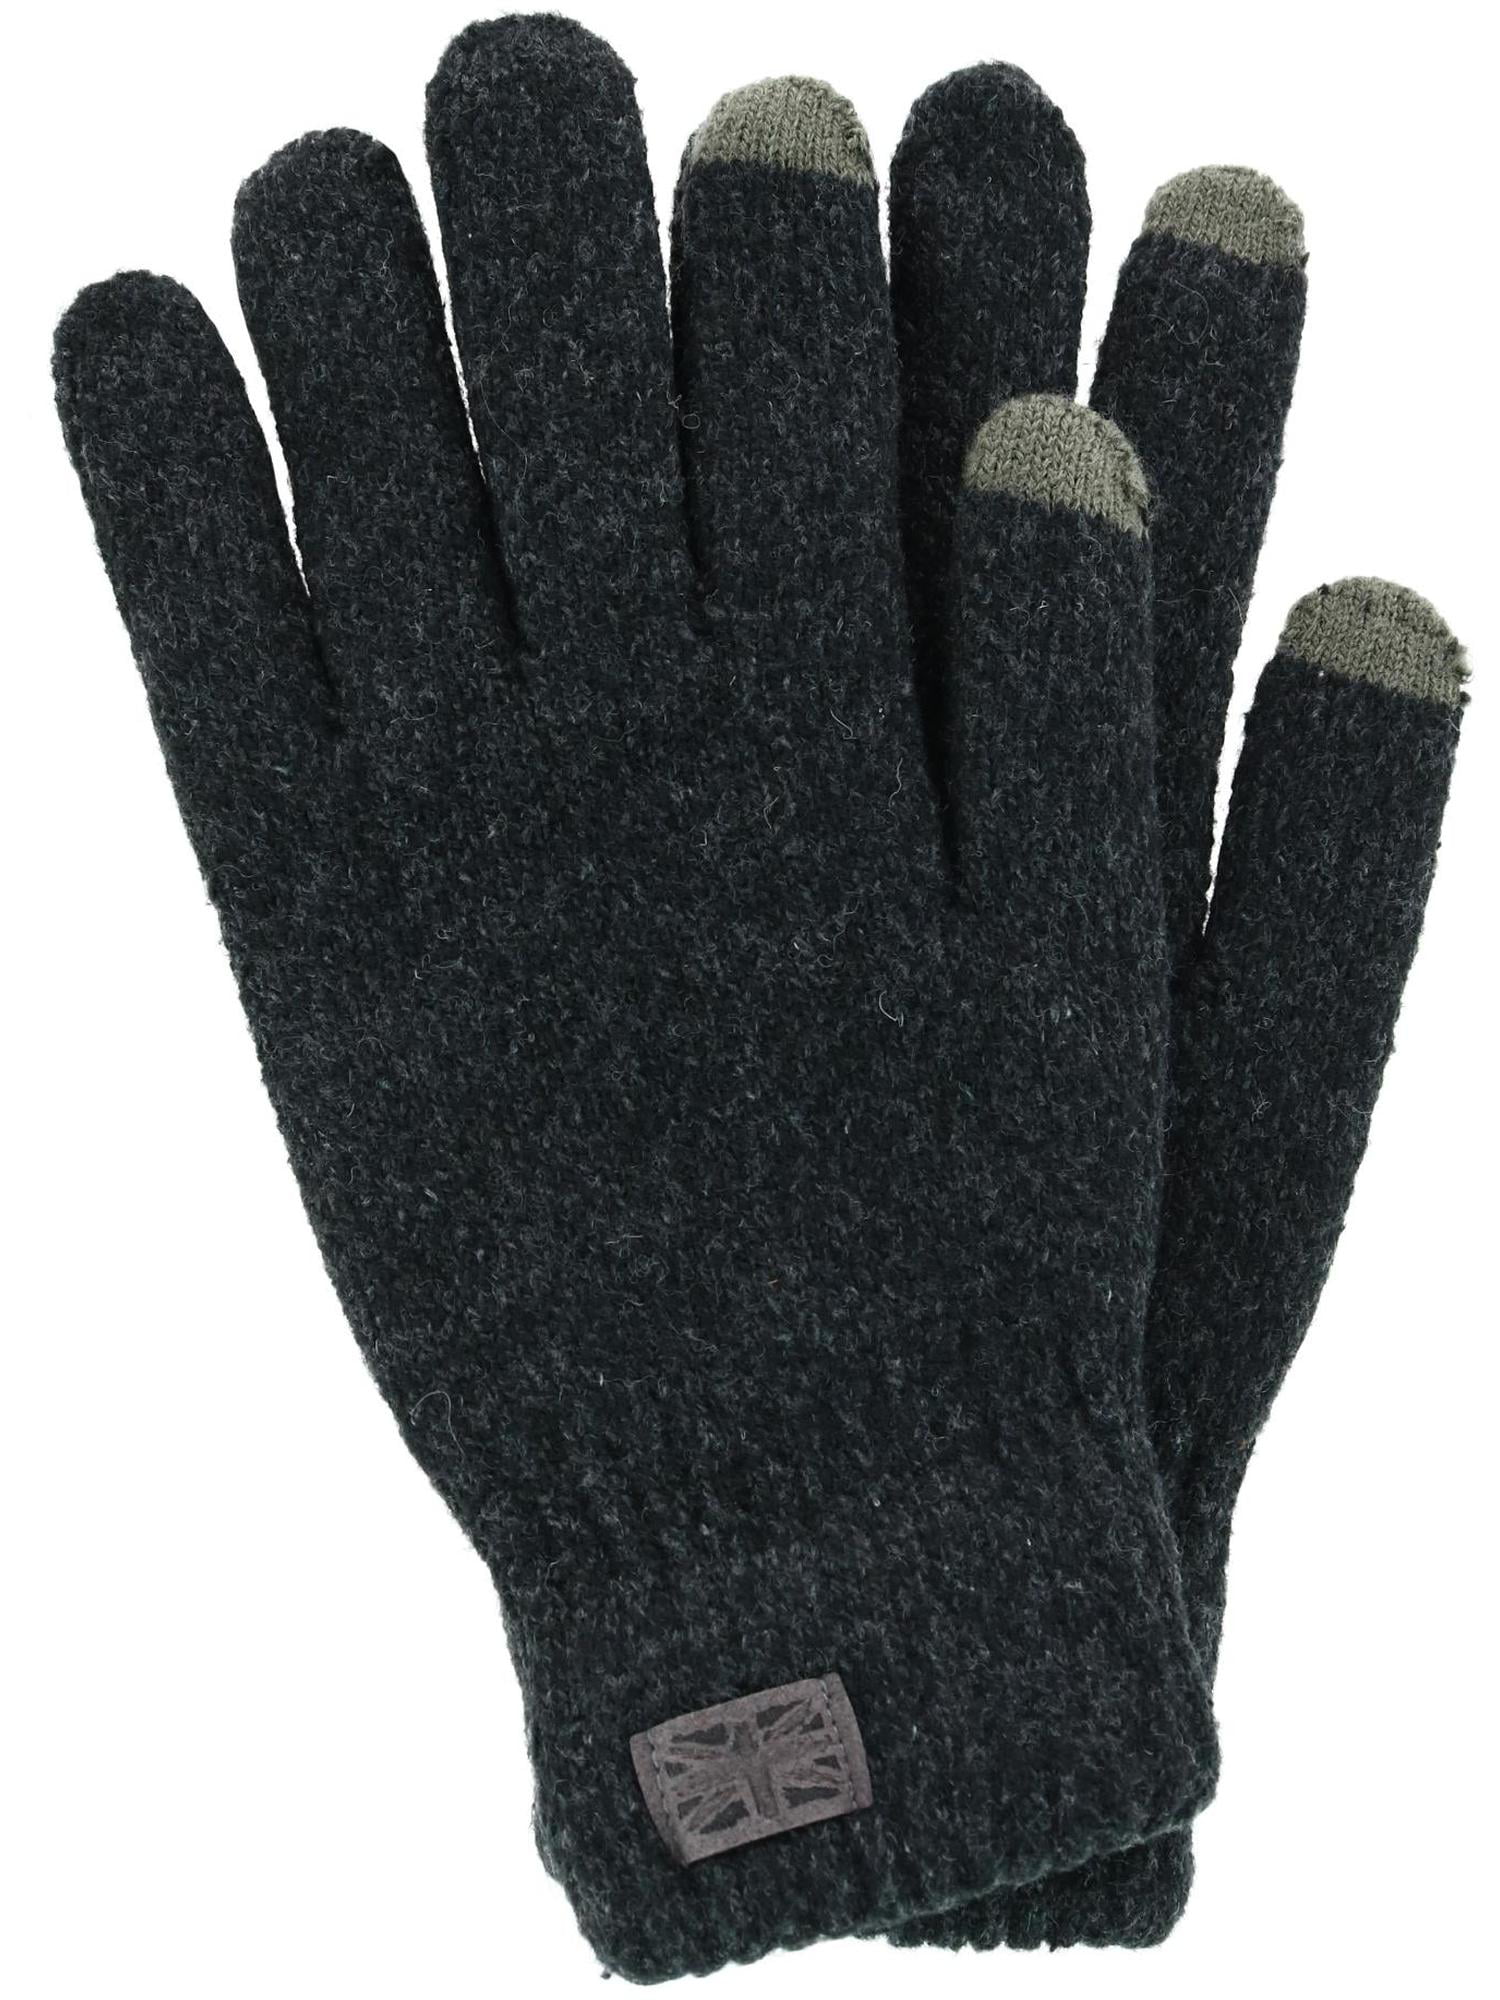 $80 ALFANI Men Knit Gloves Black Gray TOUCH SCREEN ATHLETIC WARM WINTER One Size 